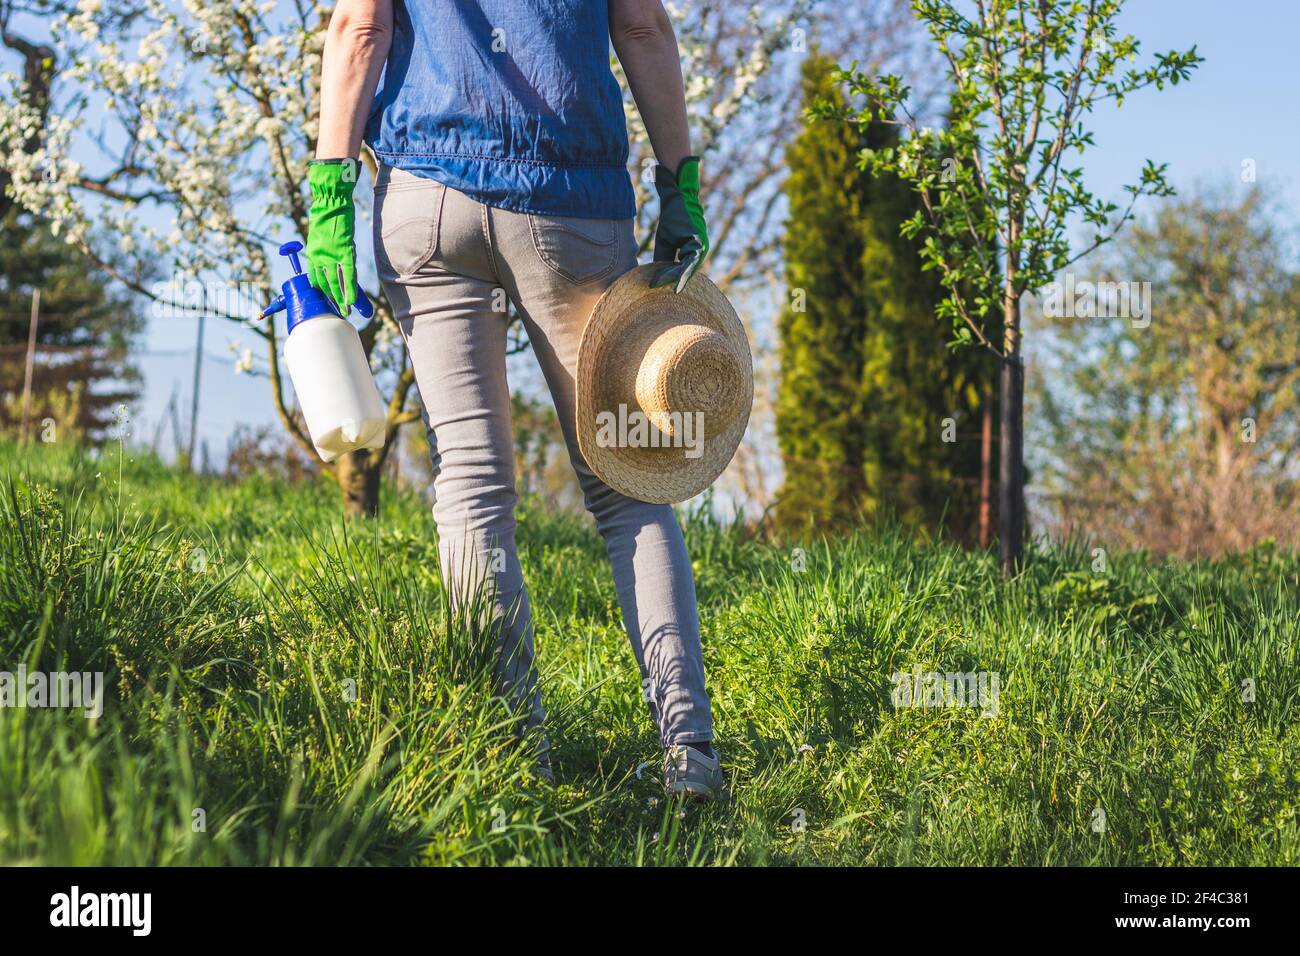 Woman farmer wearing gardening glove is holding spray bottle and straw hat and she is standing in blooming orchard. Gardening at springtime Stock Photo